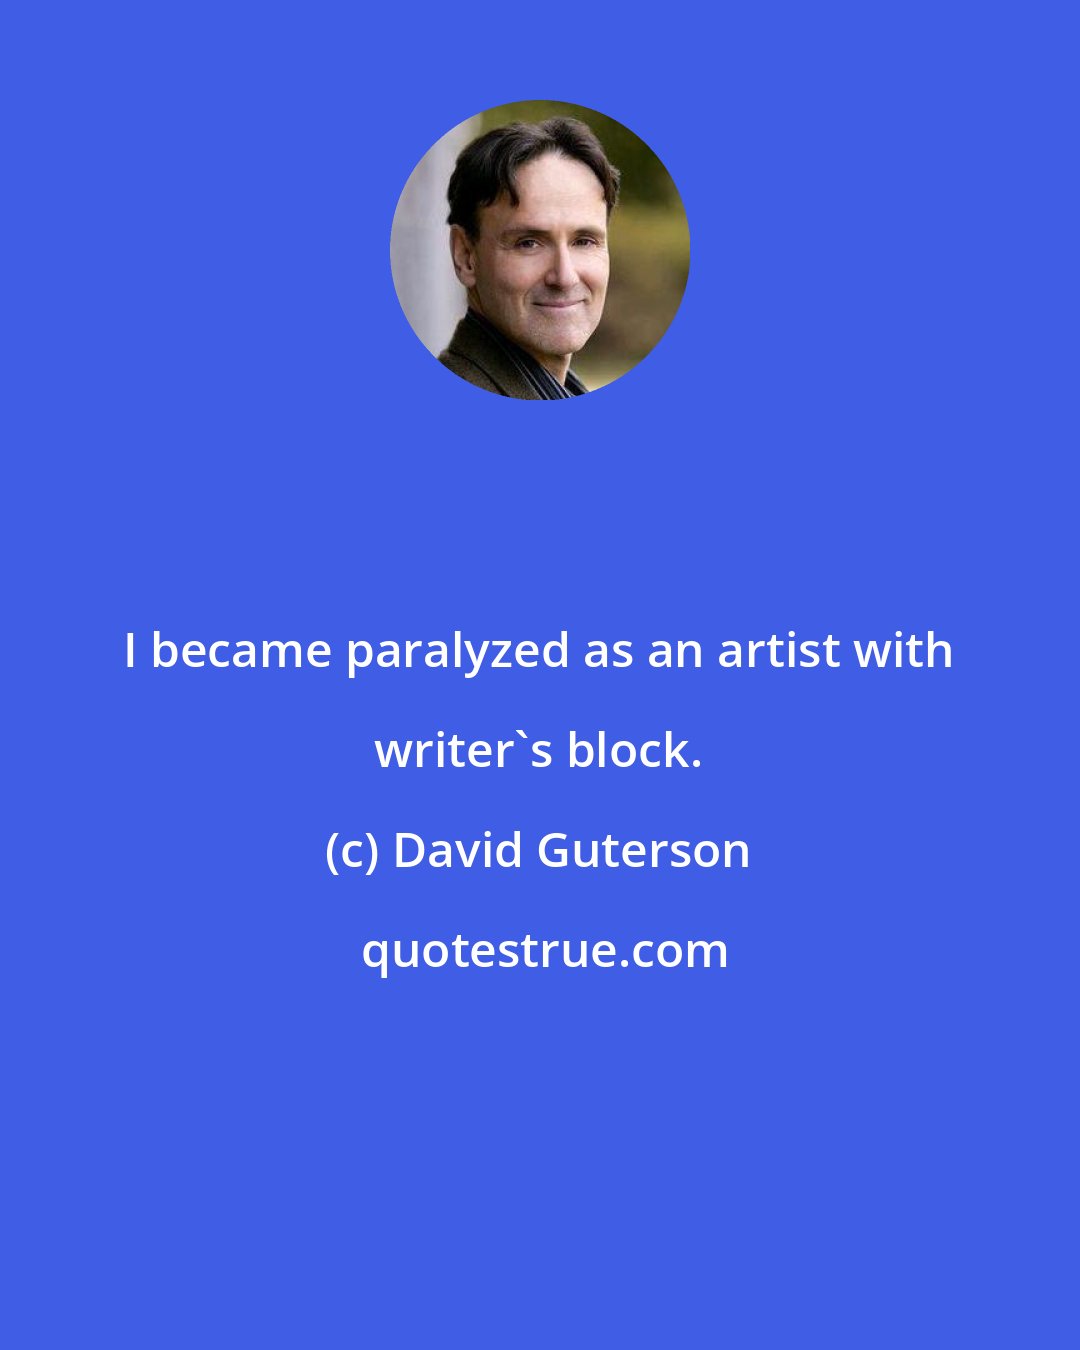 David Guterson: I became paralyzed as an artist with writer's block.